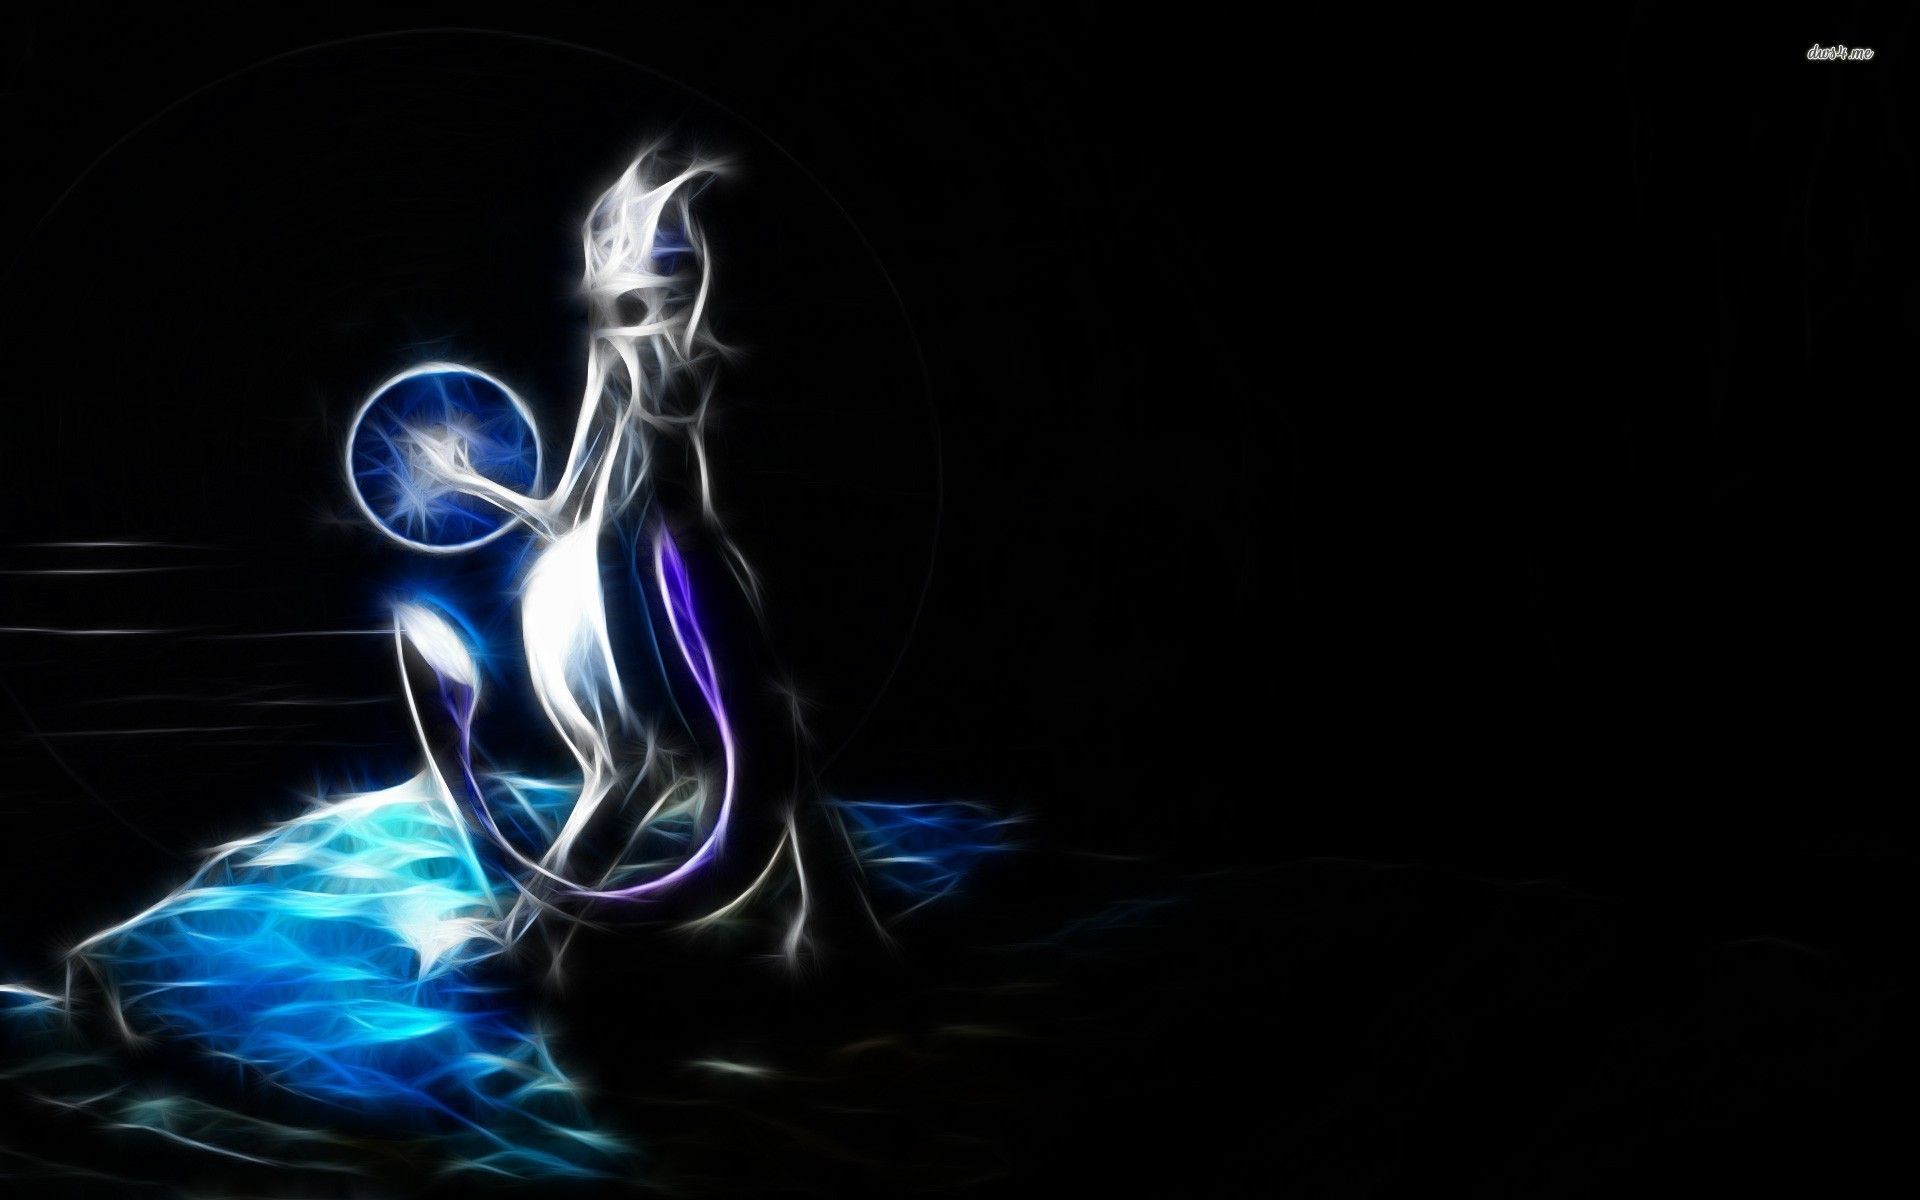 Mewtwo the dark lord Mewtwo Lord, Dark and The ojays 1920×1200 Mewtwo Wallpaper (27 Wallpaper). Adorable Wallp. Mewtwo, Pikachu wallpaper, Pokemon